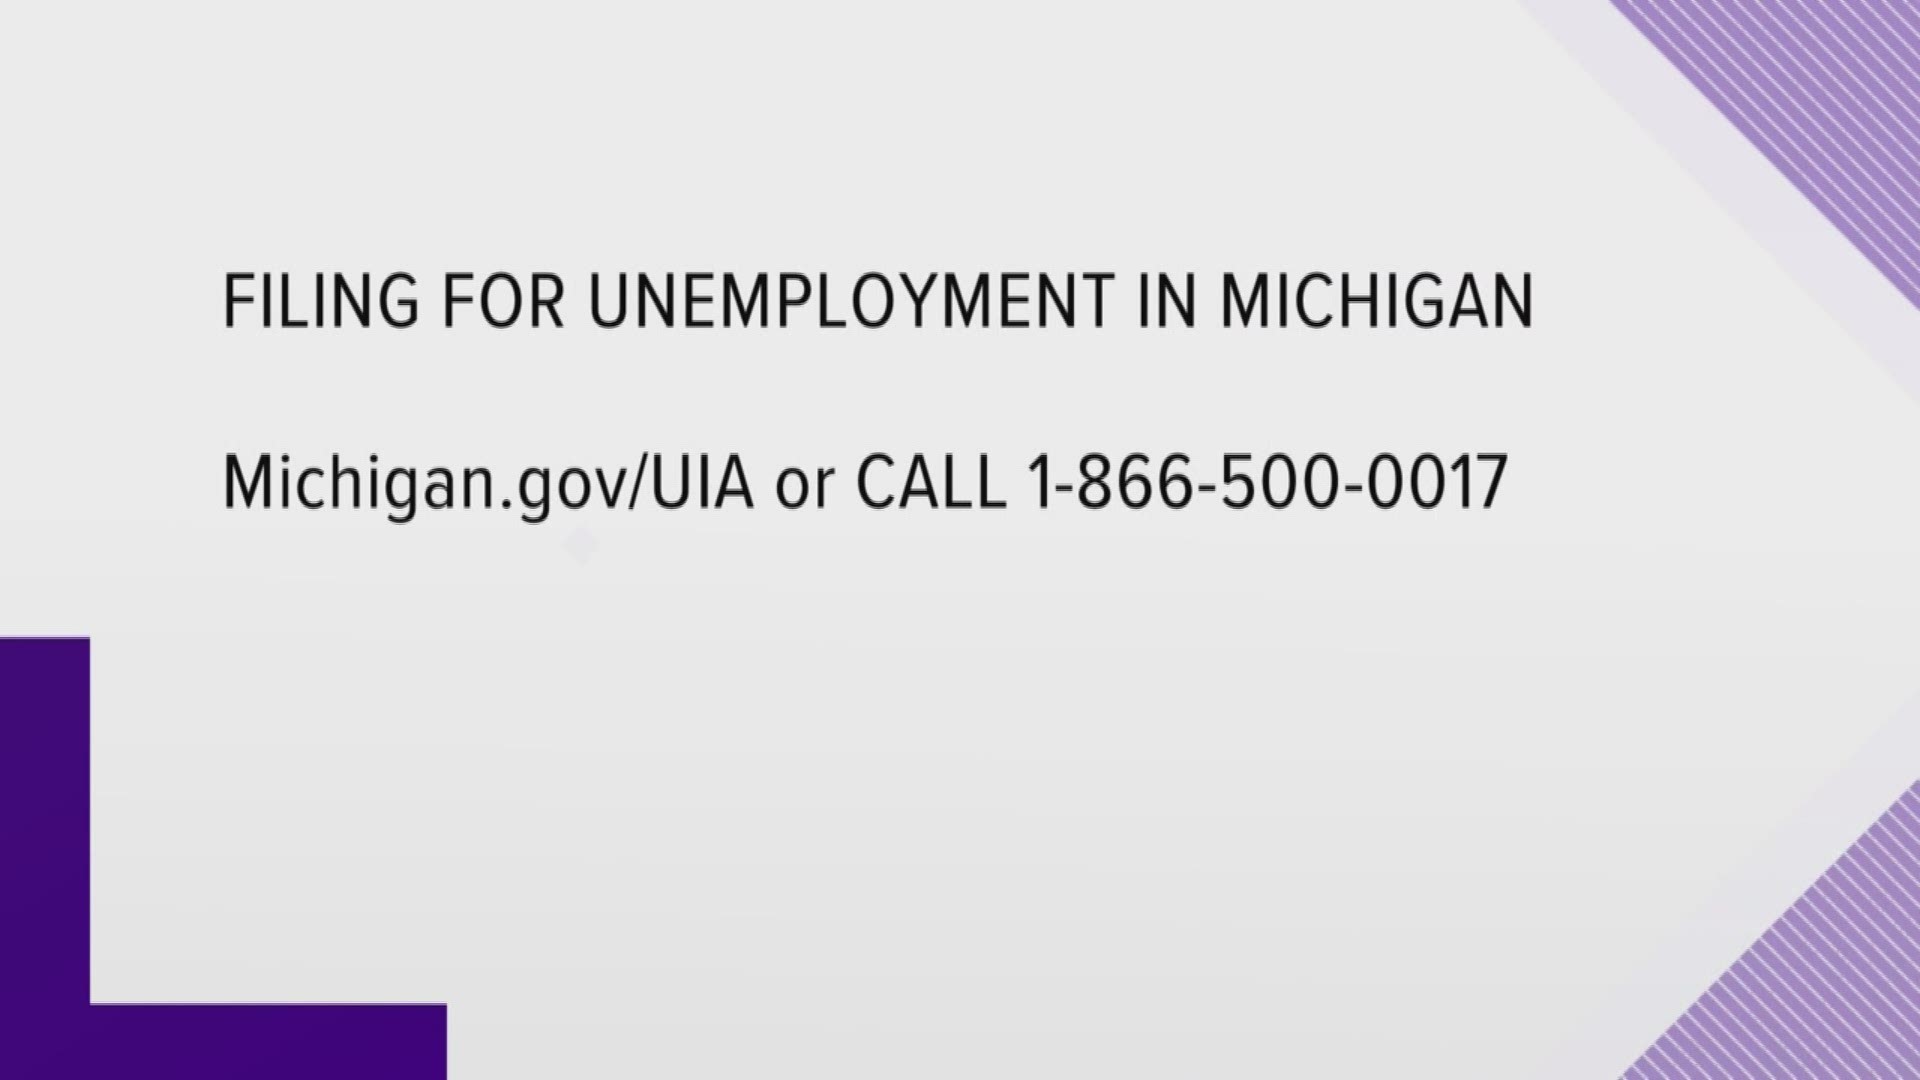 Right now officials say the call volumes in Michigan are high. Workers are being encouraged to take advantage of the online filing opportunities if they can.